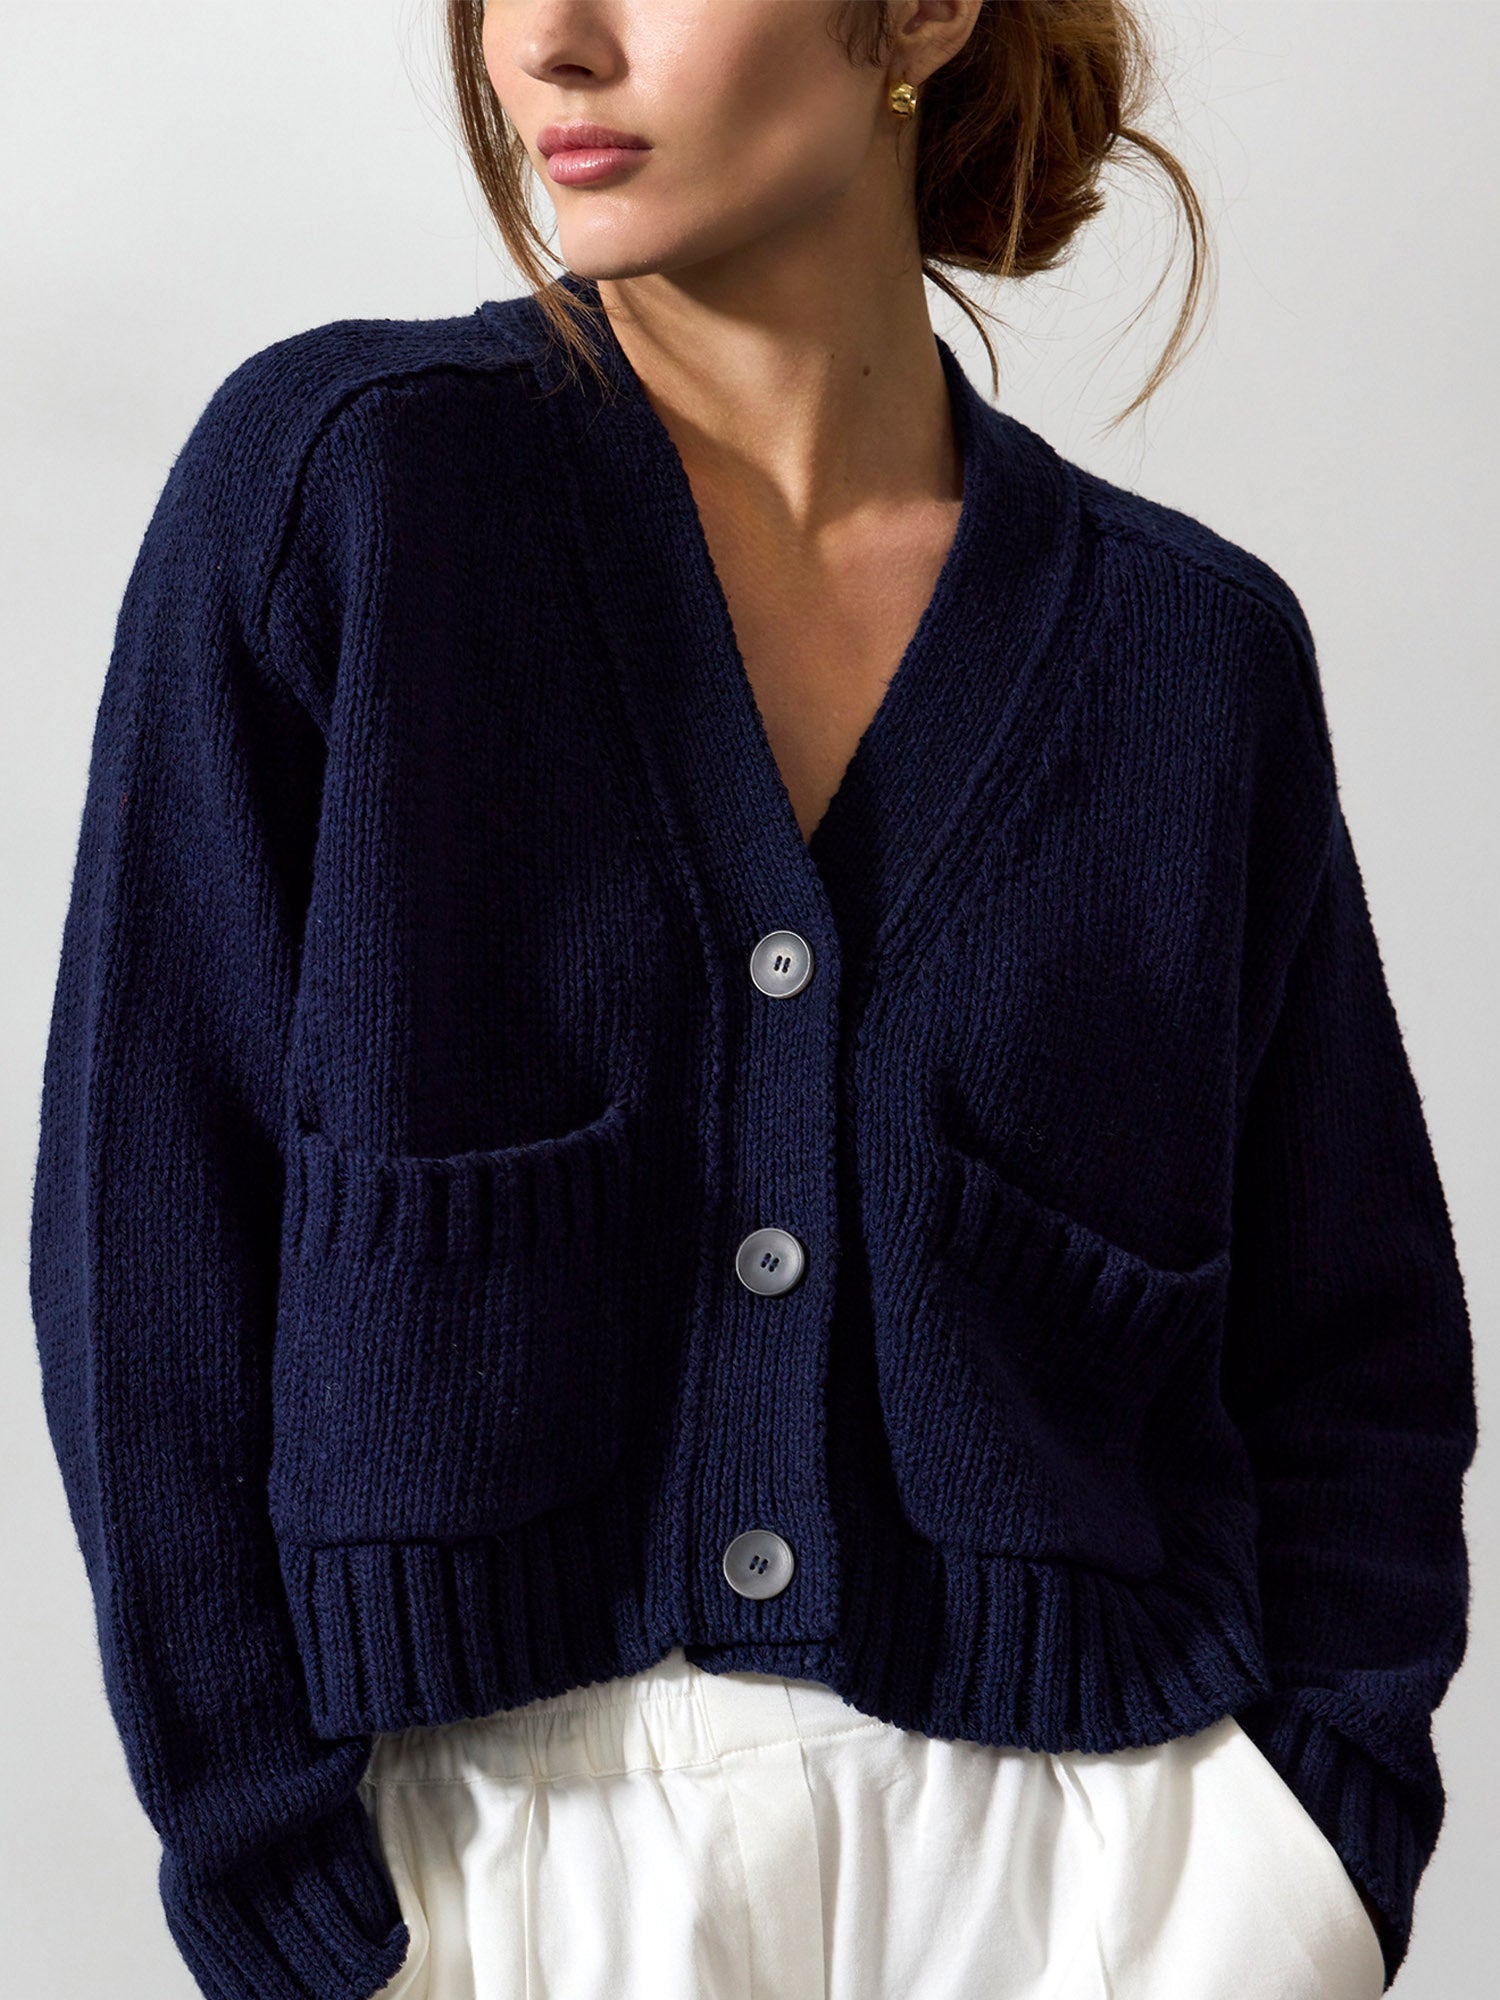 Cropped navy linen cotton cardigan sweater front view